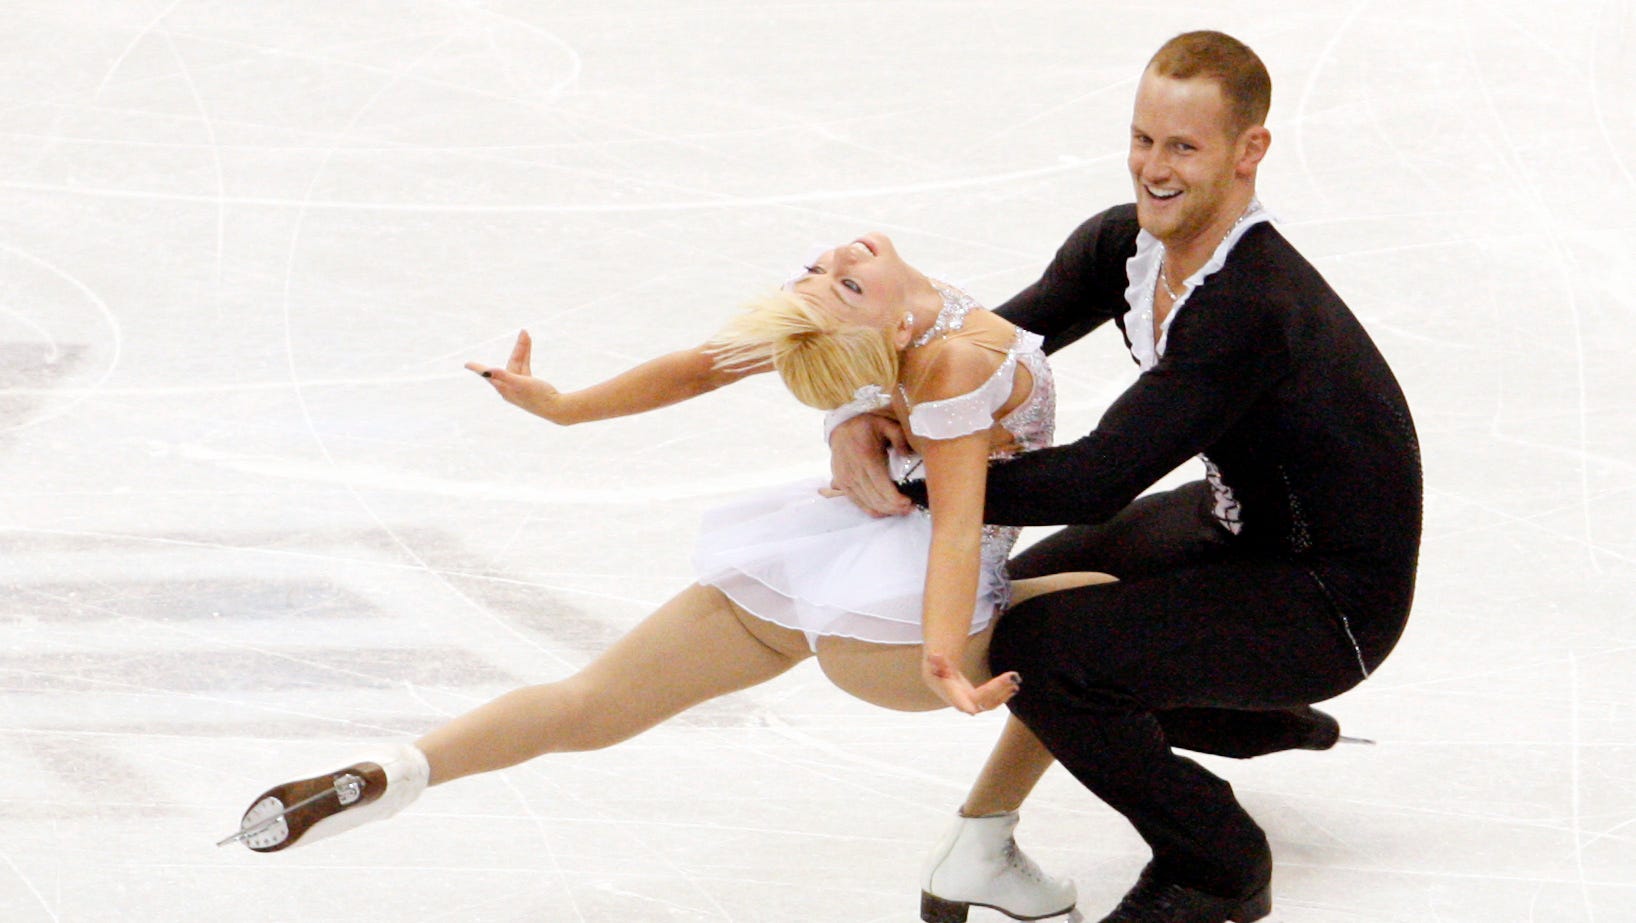 For U.S. pairs skaters, holidays are cut short